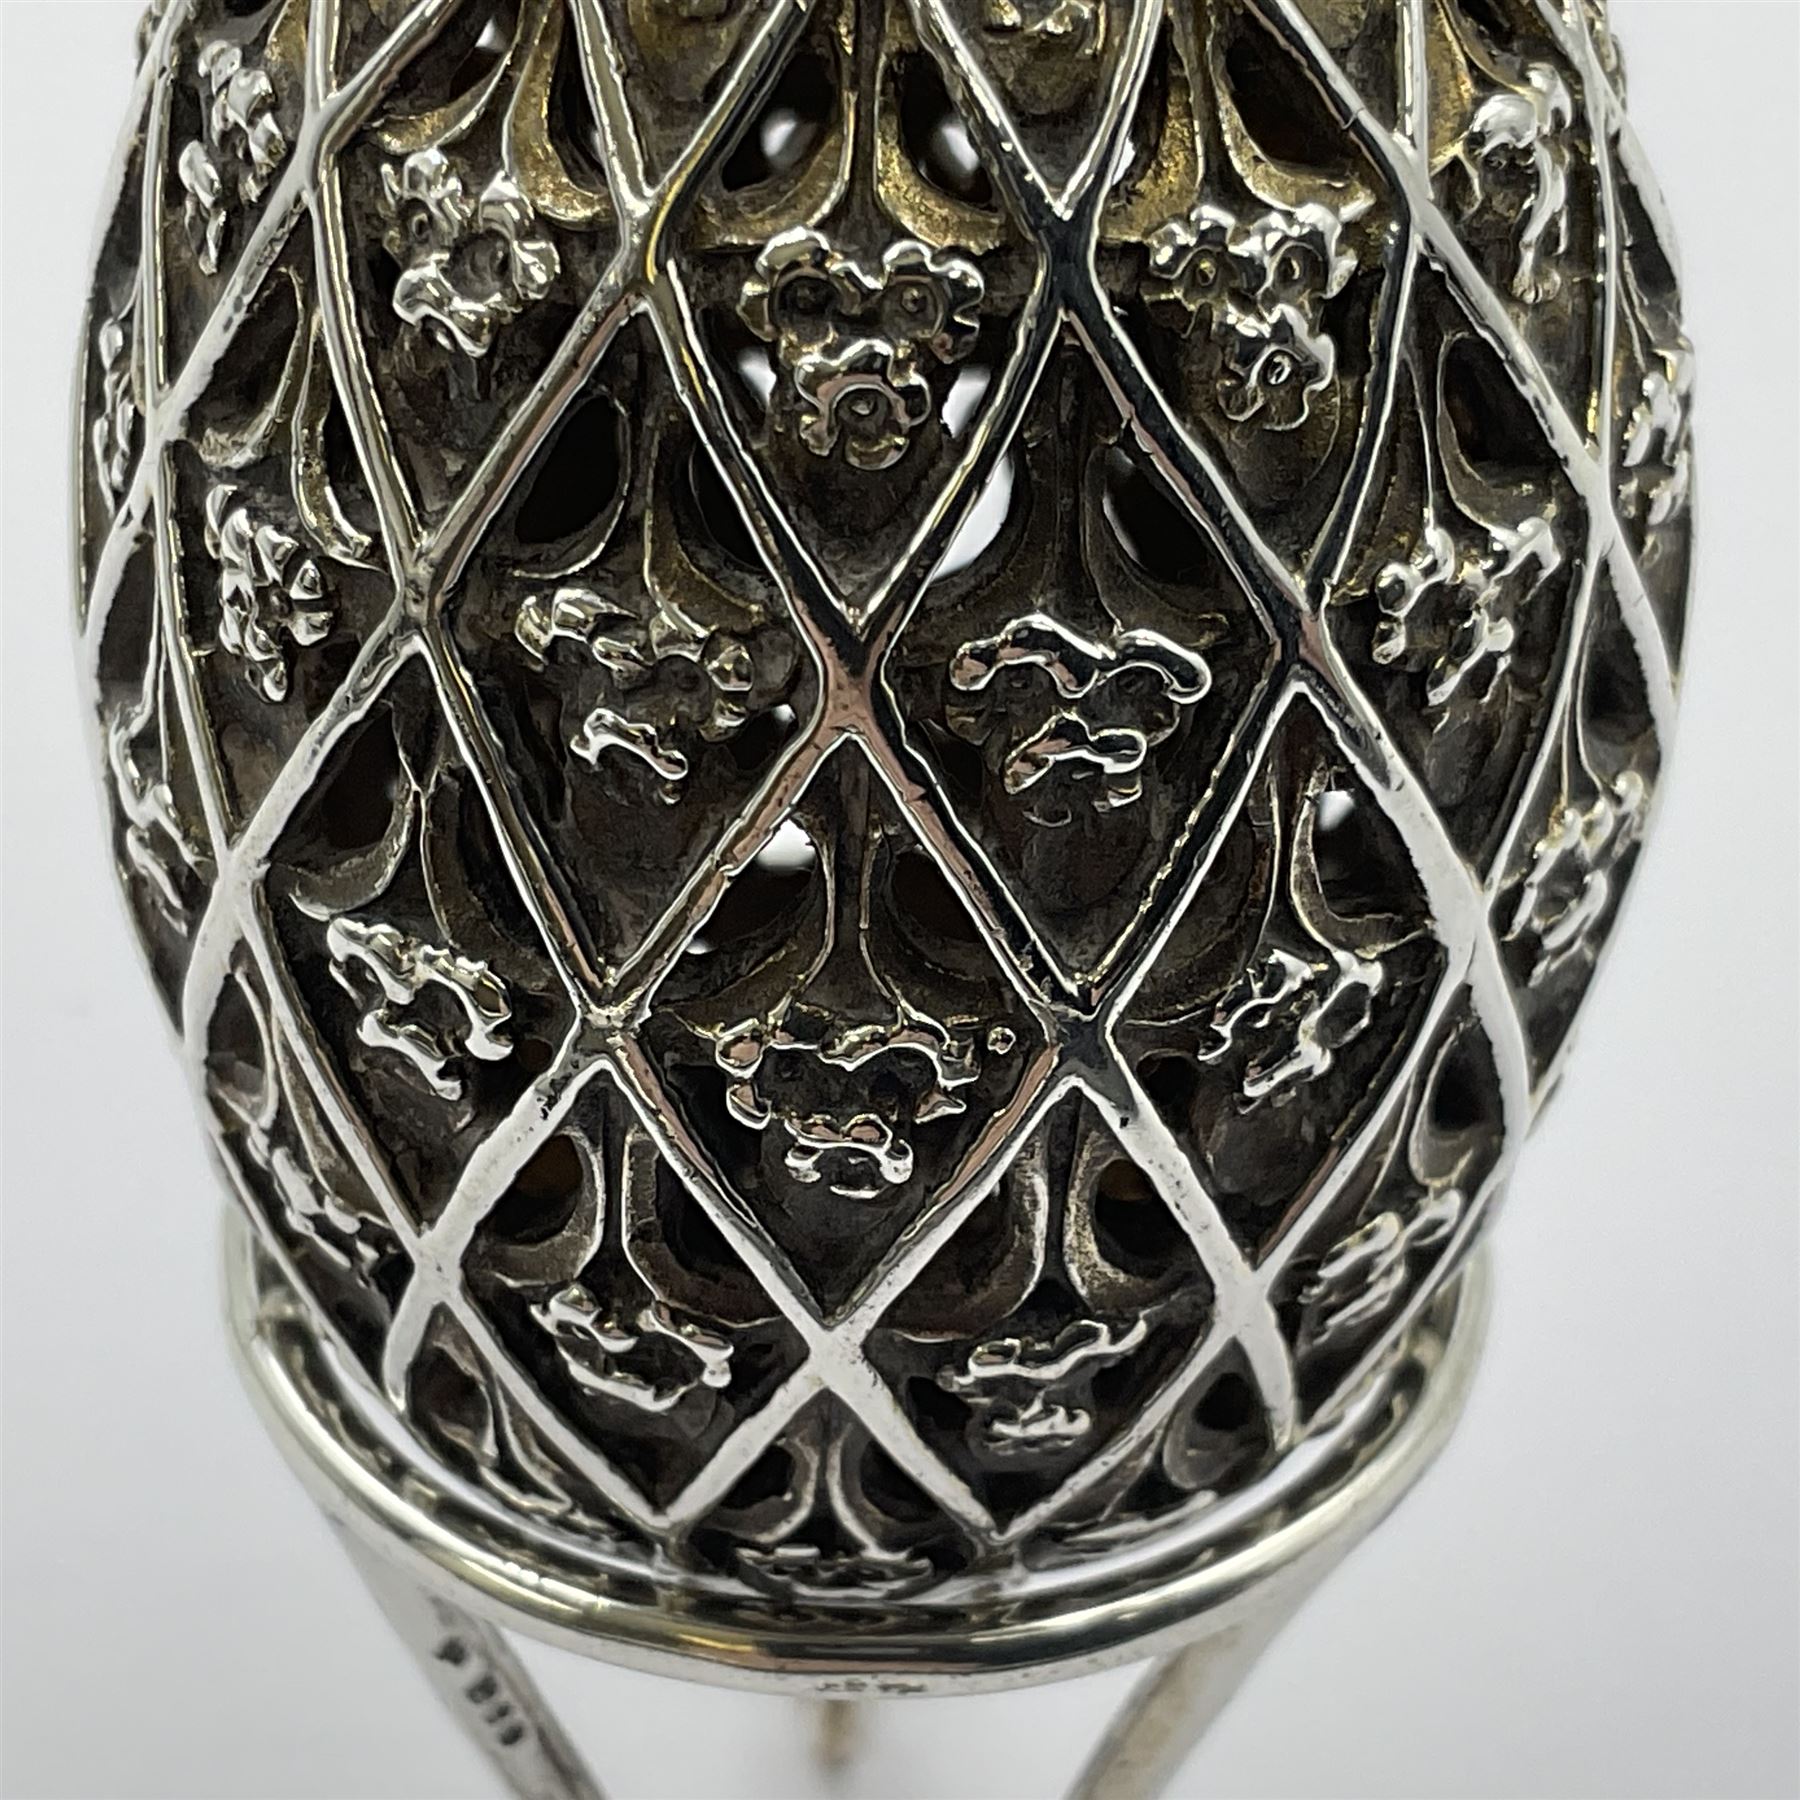 Modern silver limited edition Easter egg - Image 3 of 19